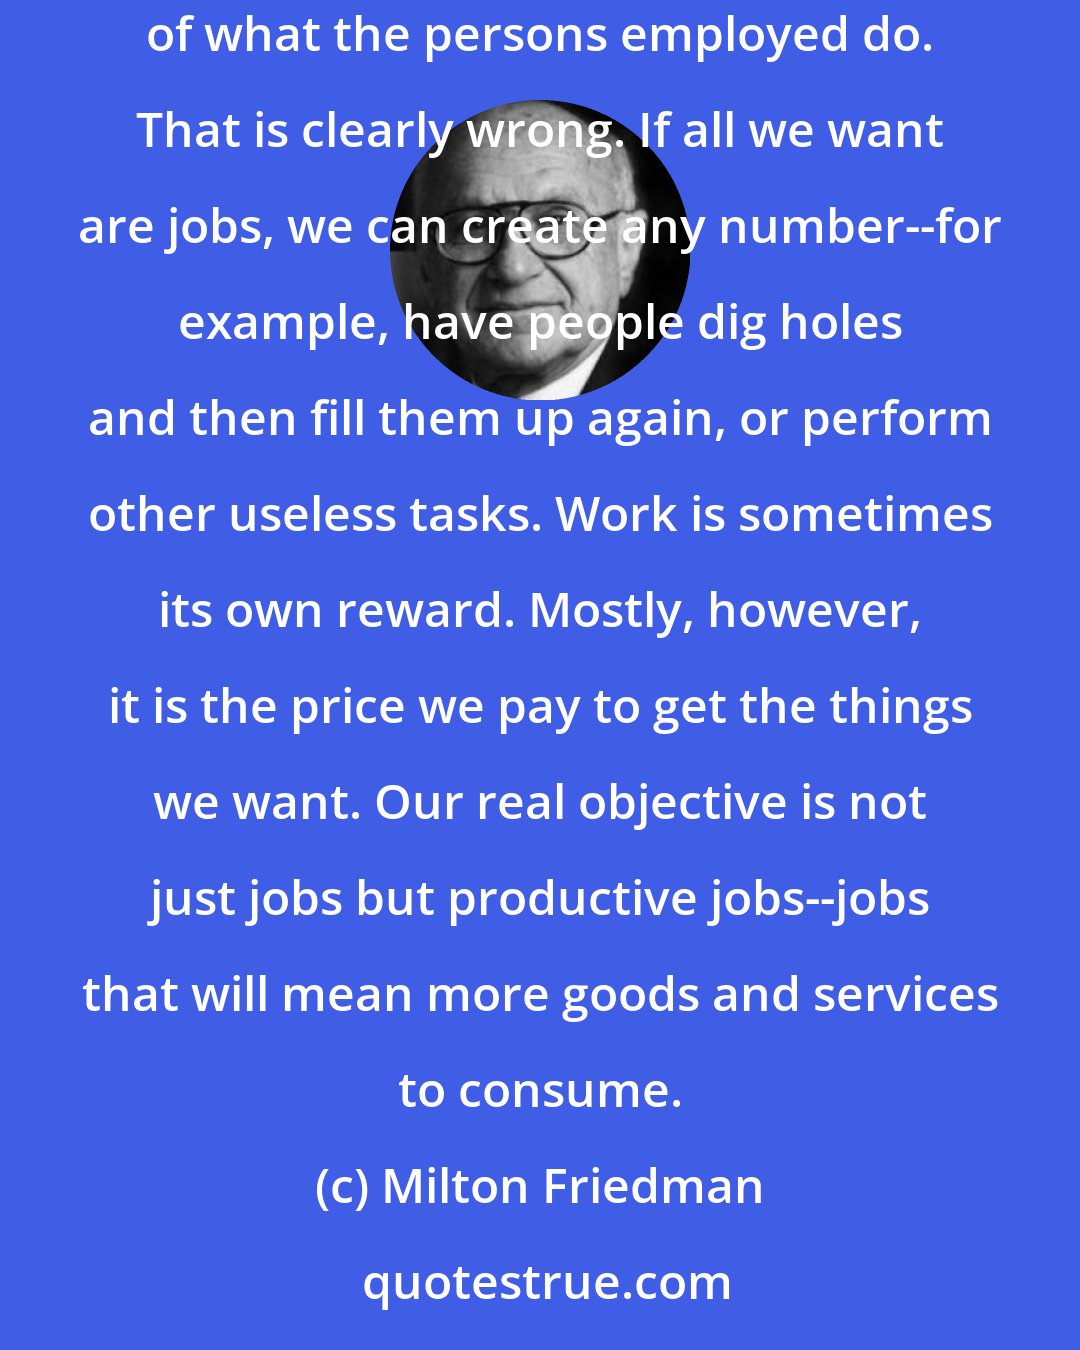 Milton Friedman: For example, the supporters of tariffs treat it as self-evident that the creation of jobs is a desirable end, in and of itself, regardless of what the persons employed do. That is clearly wrong. If all we want are jobs, we can create any number--for example, have people dig holes and then fill them up again, or perform other useless tasks. Work is sometimes its own reward. Mostly, however, it is the price we pay to get the things we want. Our real objective is not just jobs but productive jobs--jobs that will mean more goods and services to consume.